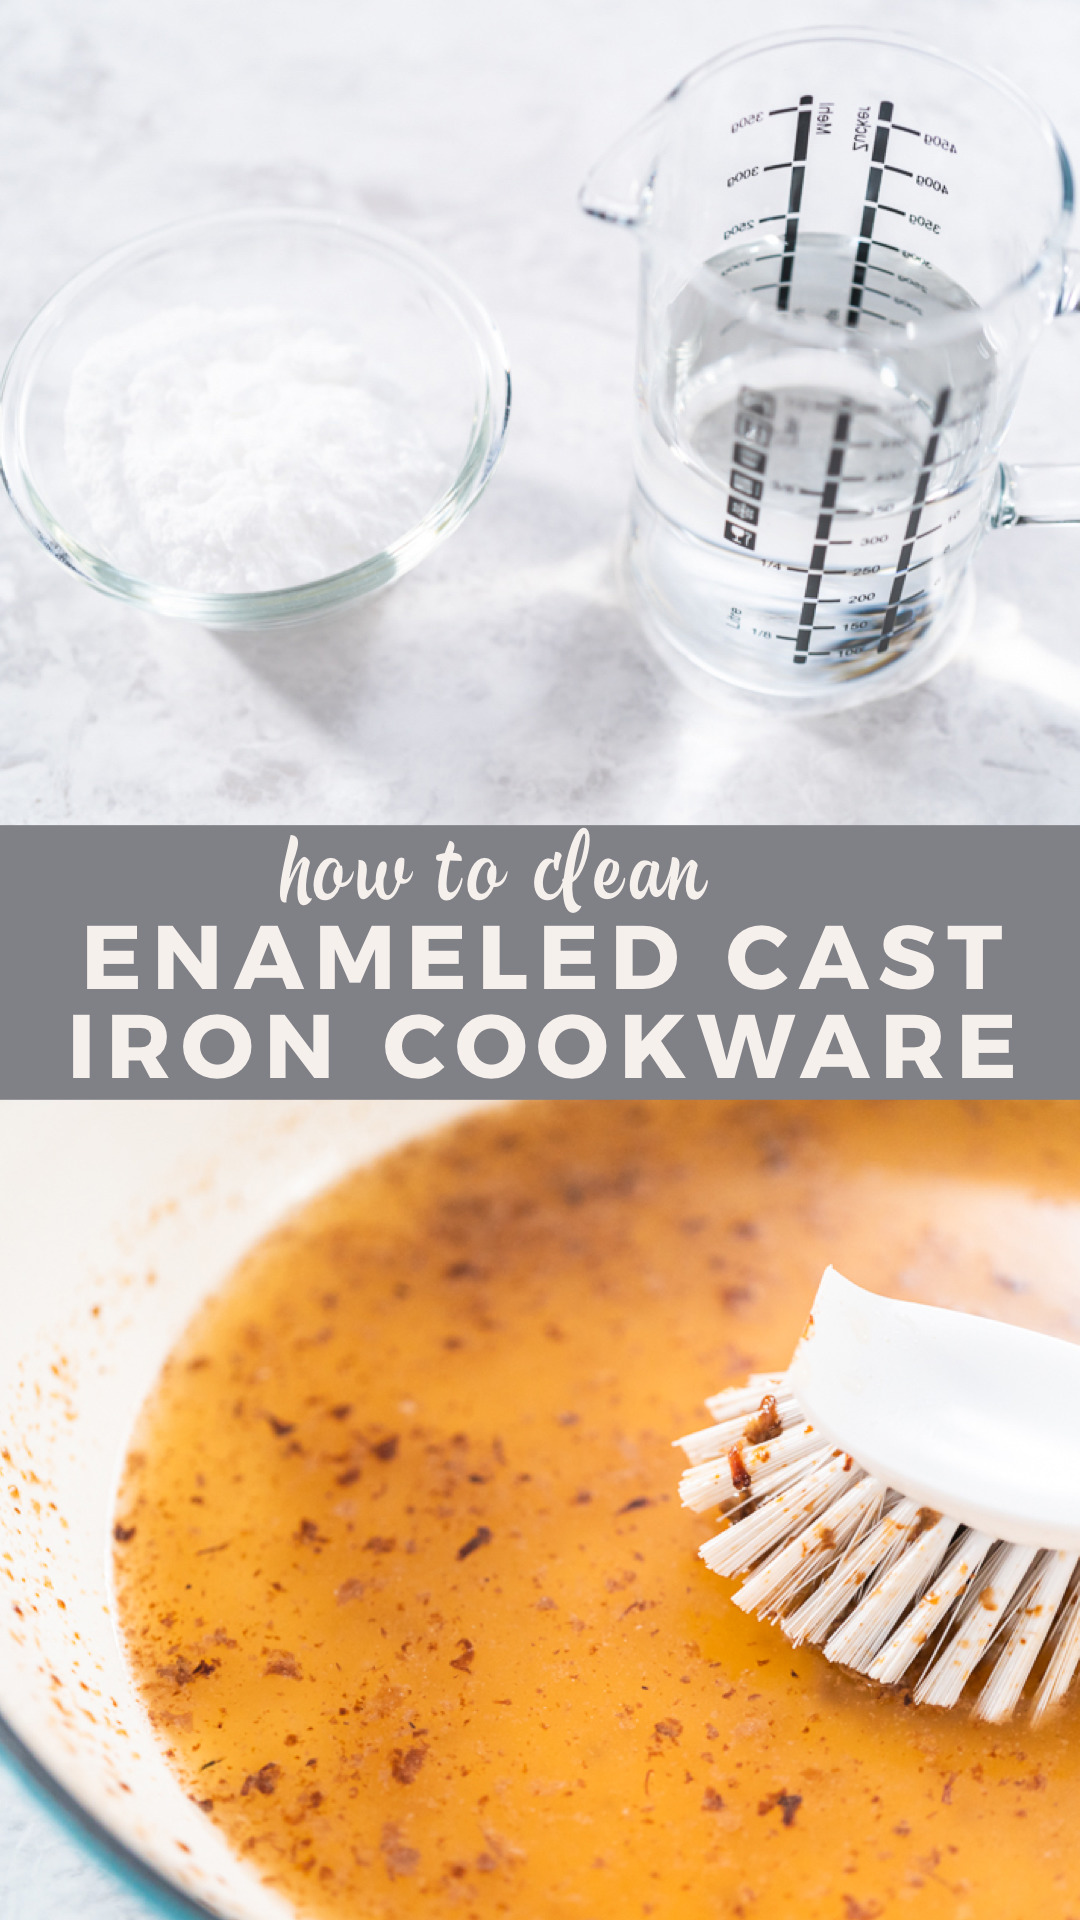 How to clean enameled cast iron cookware